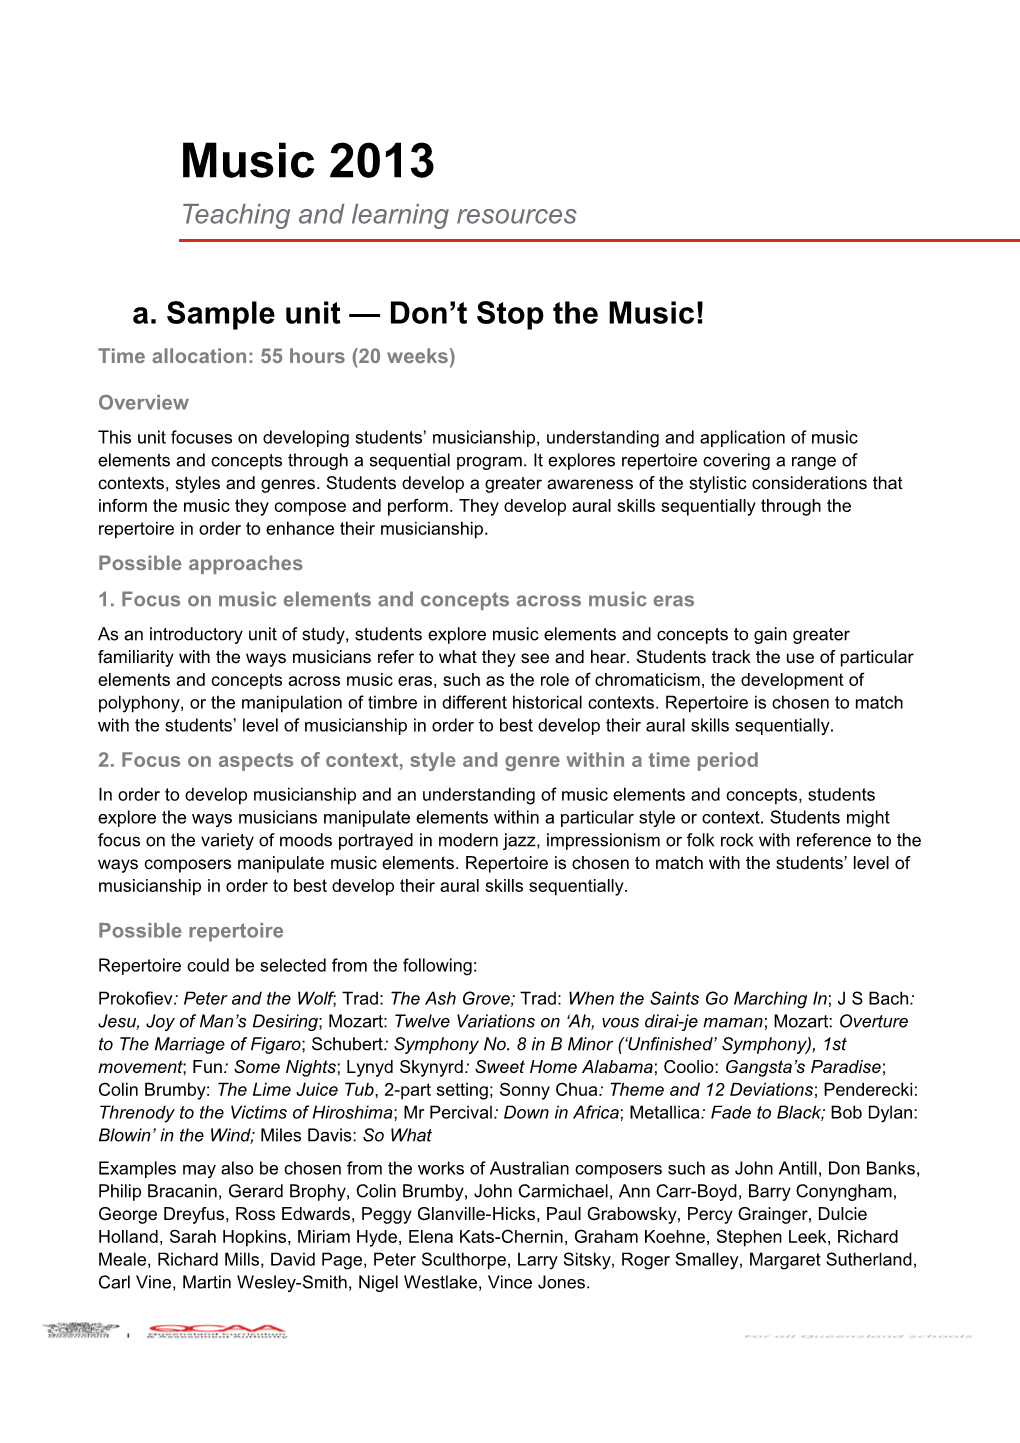 Music (2013) Teaching and Learning Resources: Sample Unit - Don't Stop the Music